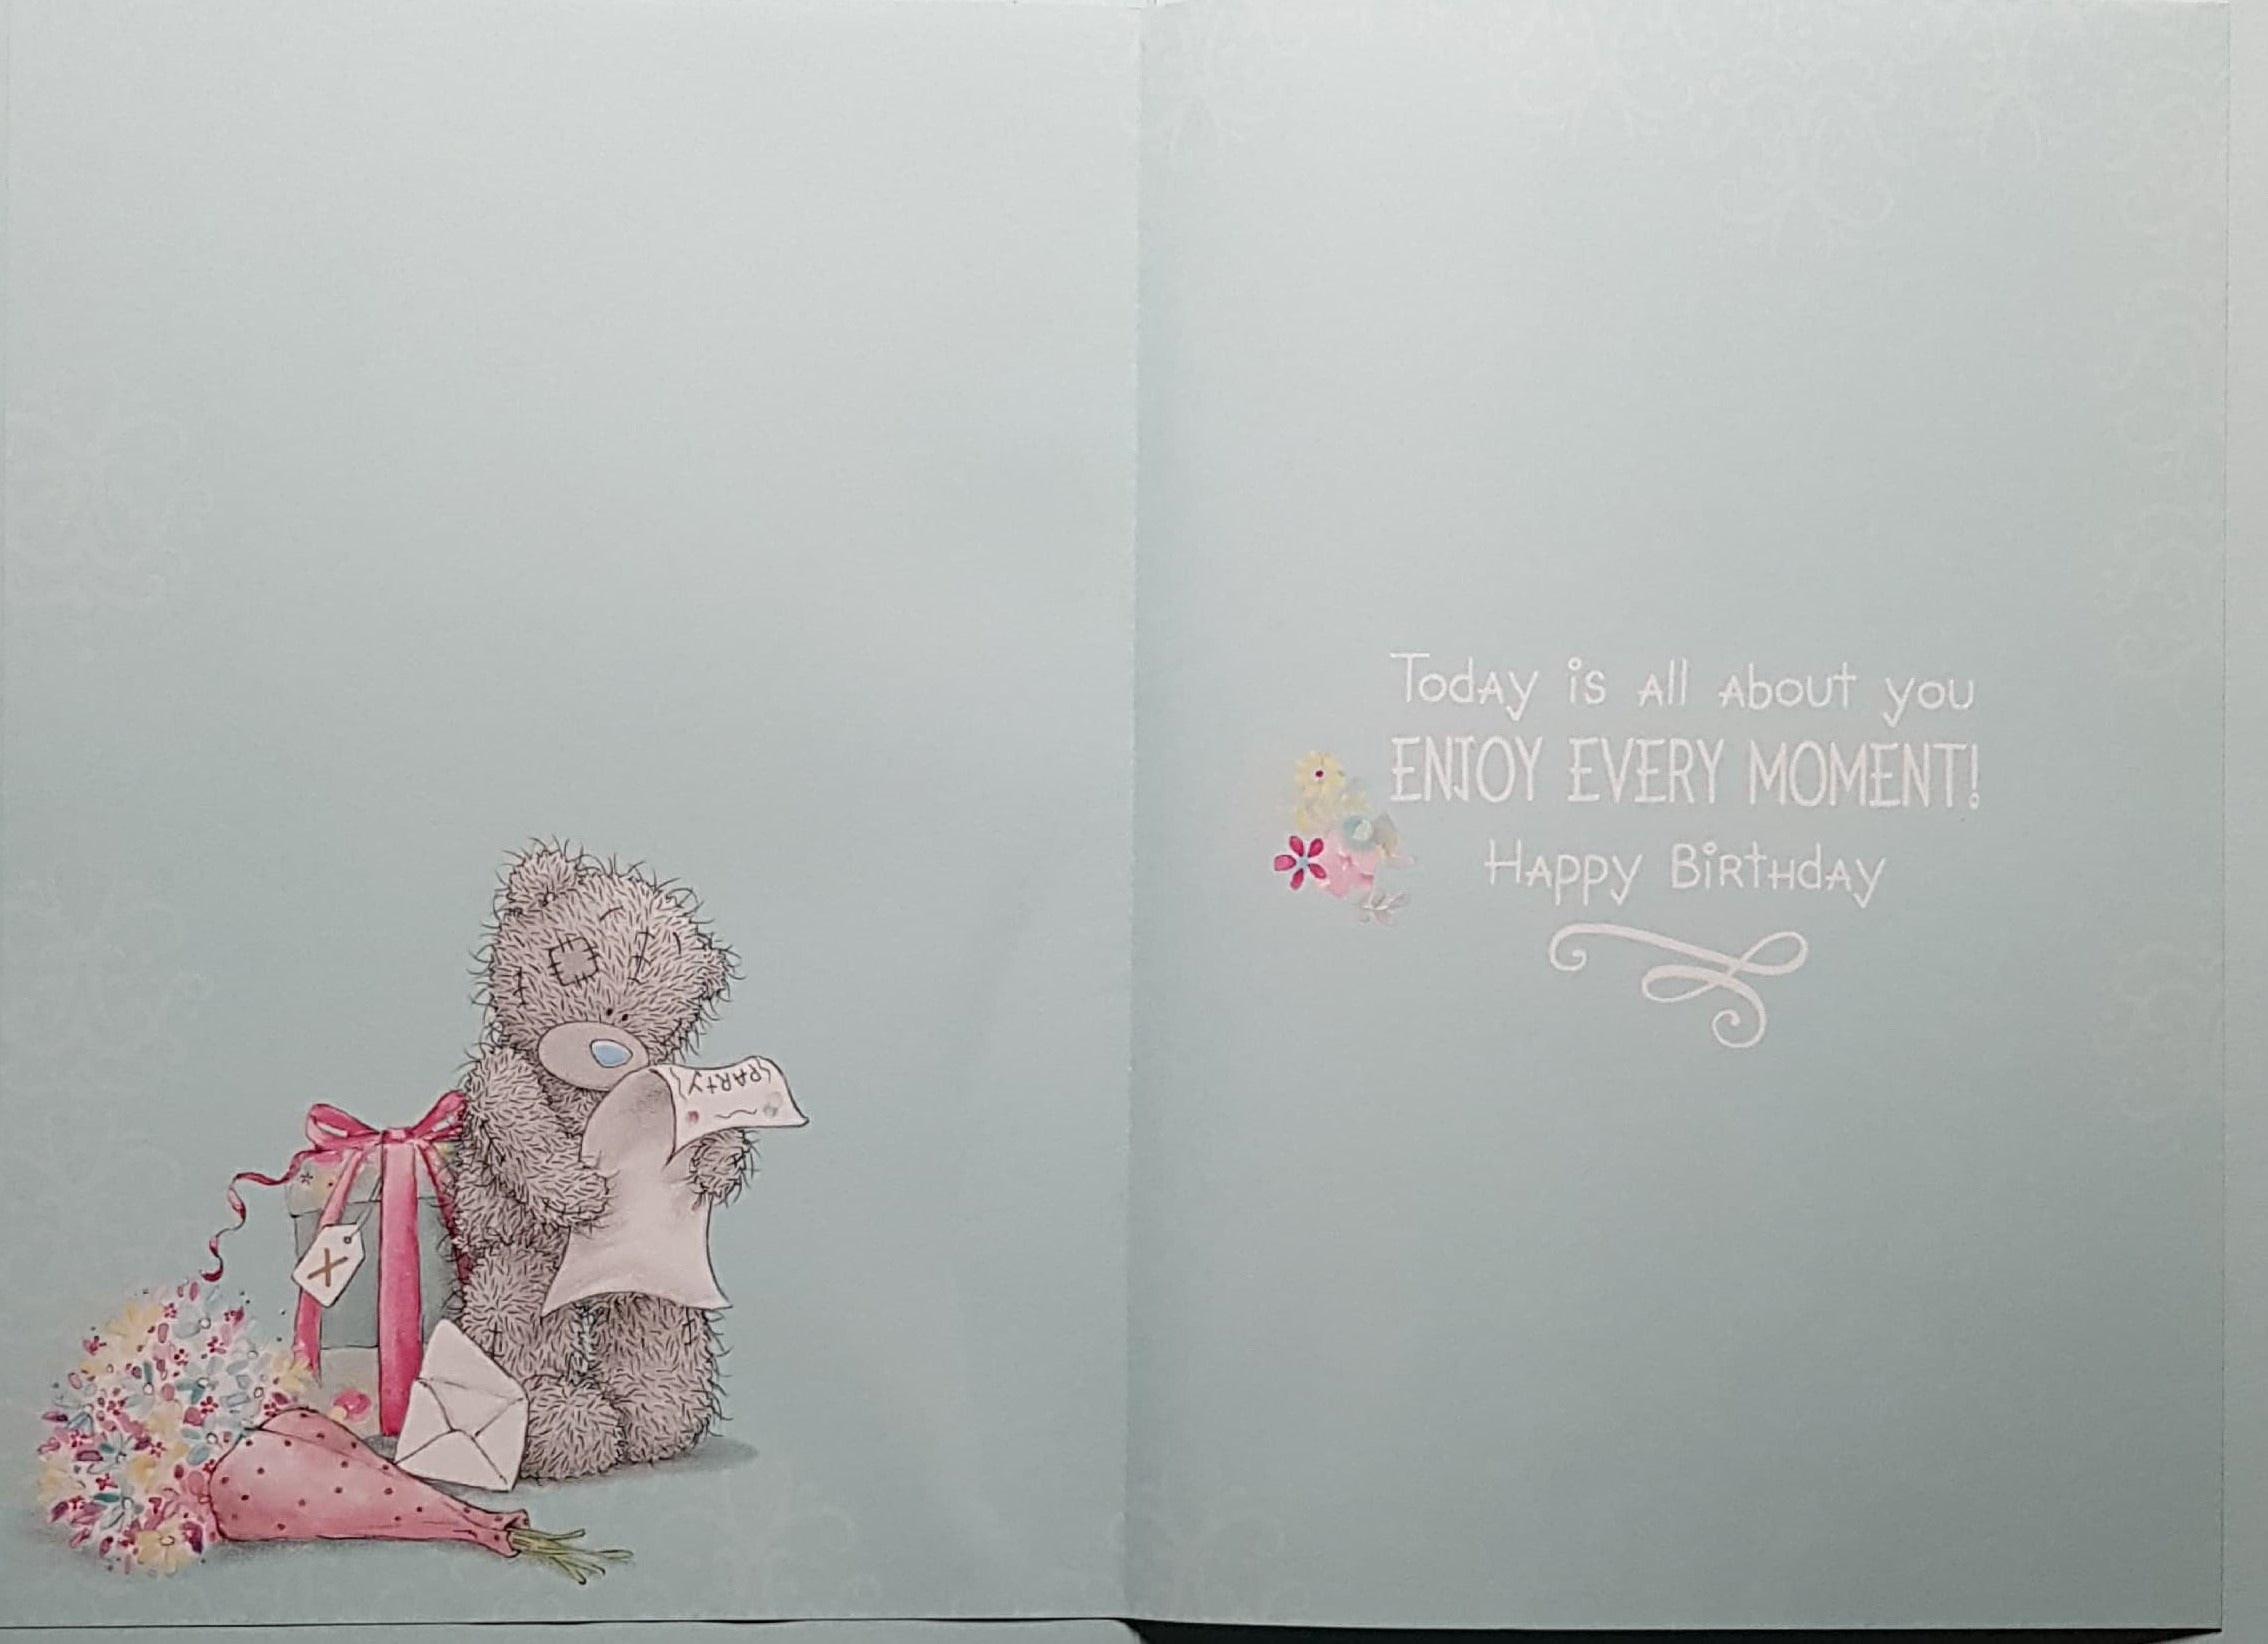 Birthday Card - Daughter / Teddy Unwrapping A Gift Box With A Blue Bow